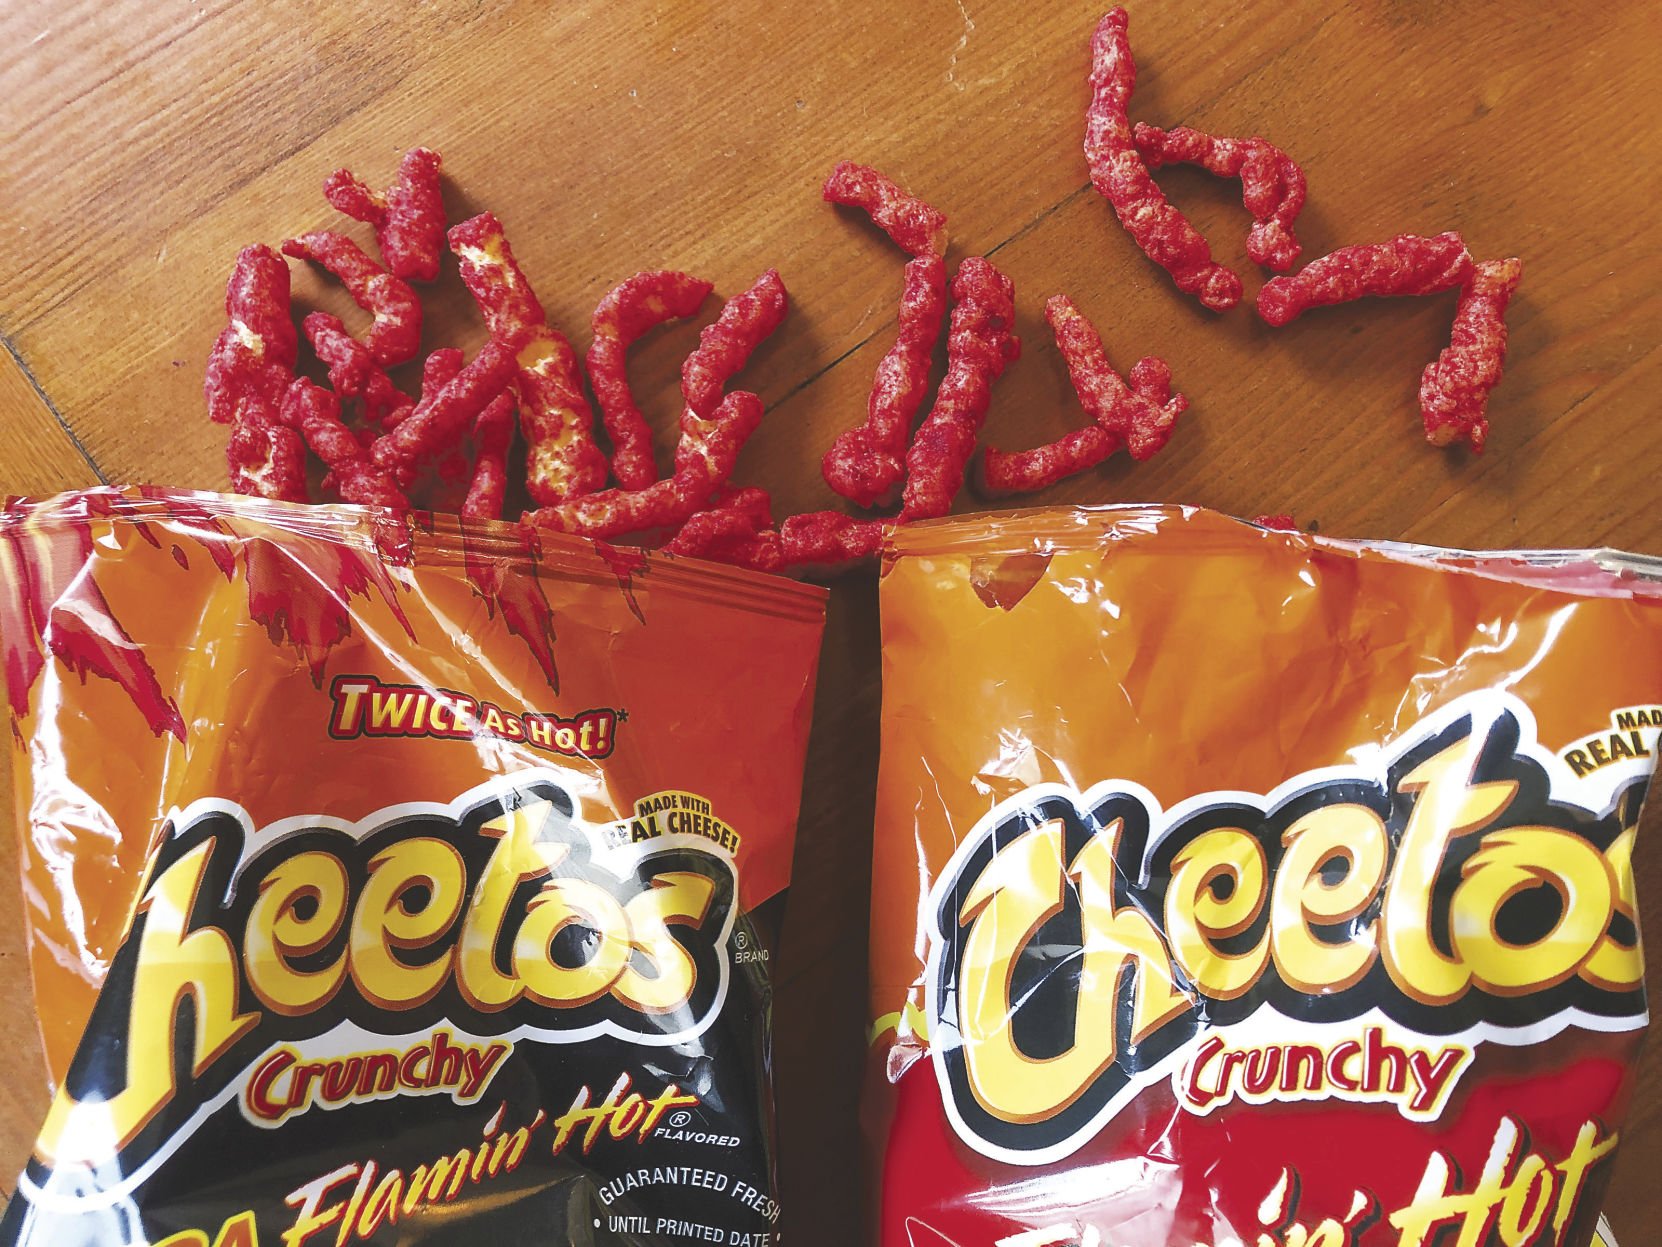 flamin hot cheetos nutrition facts